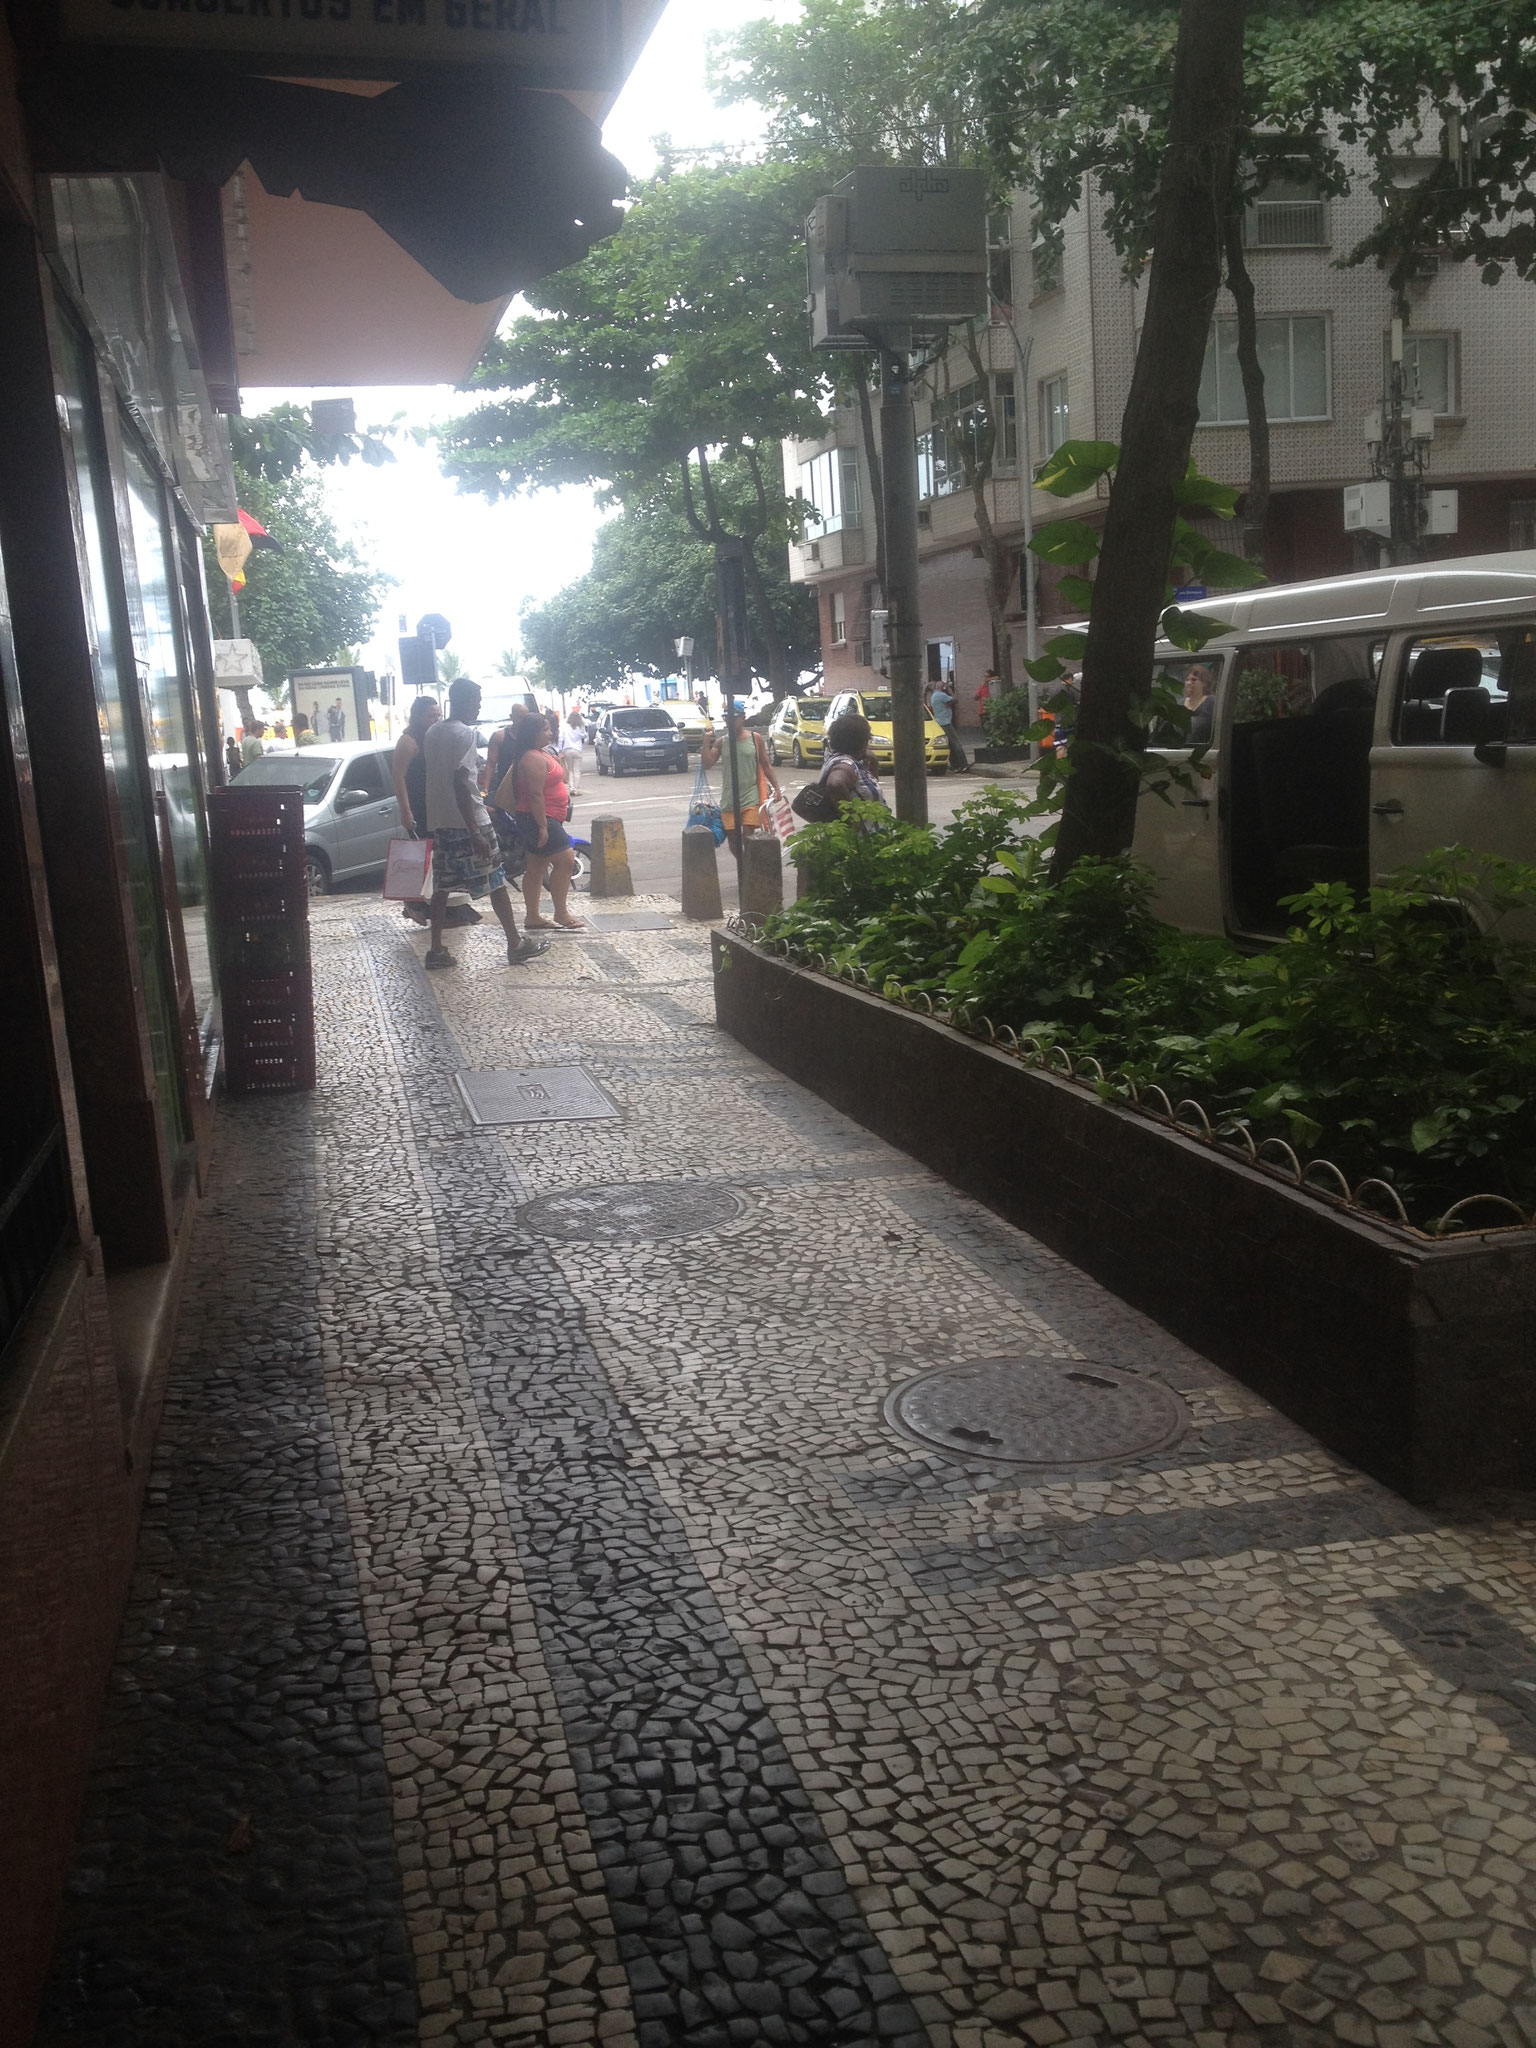 Anchieta street, right after leaving the flat building